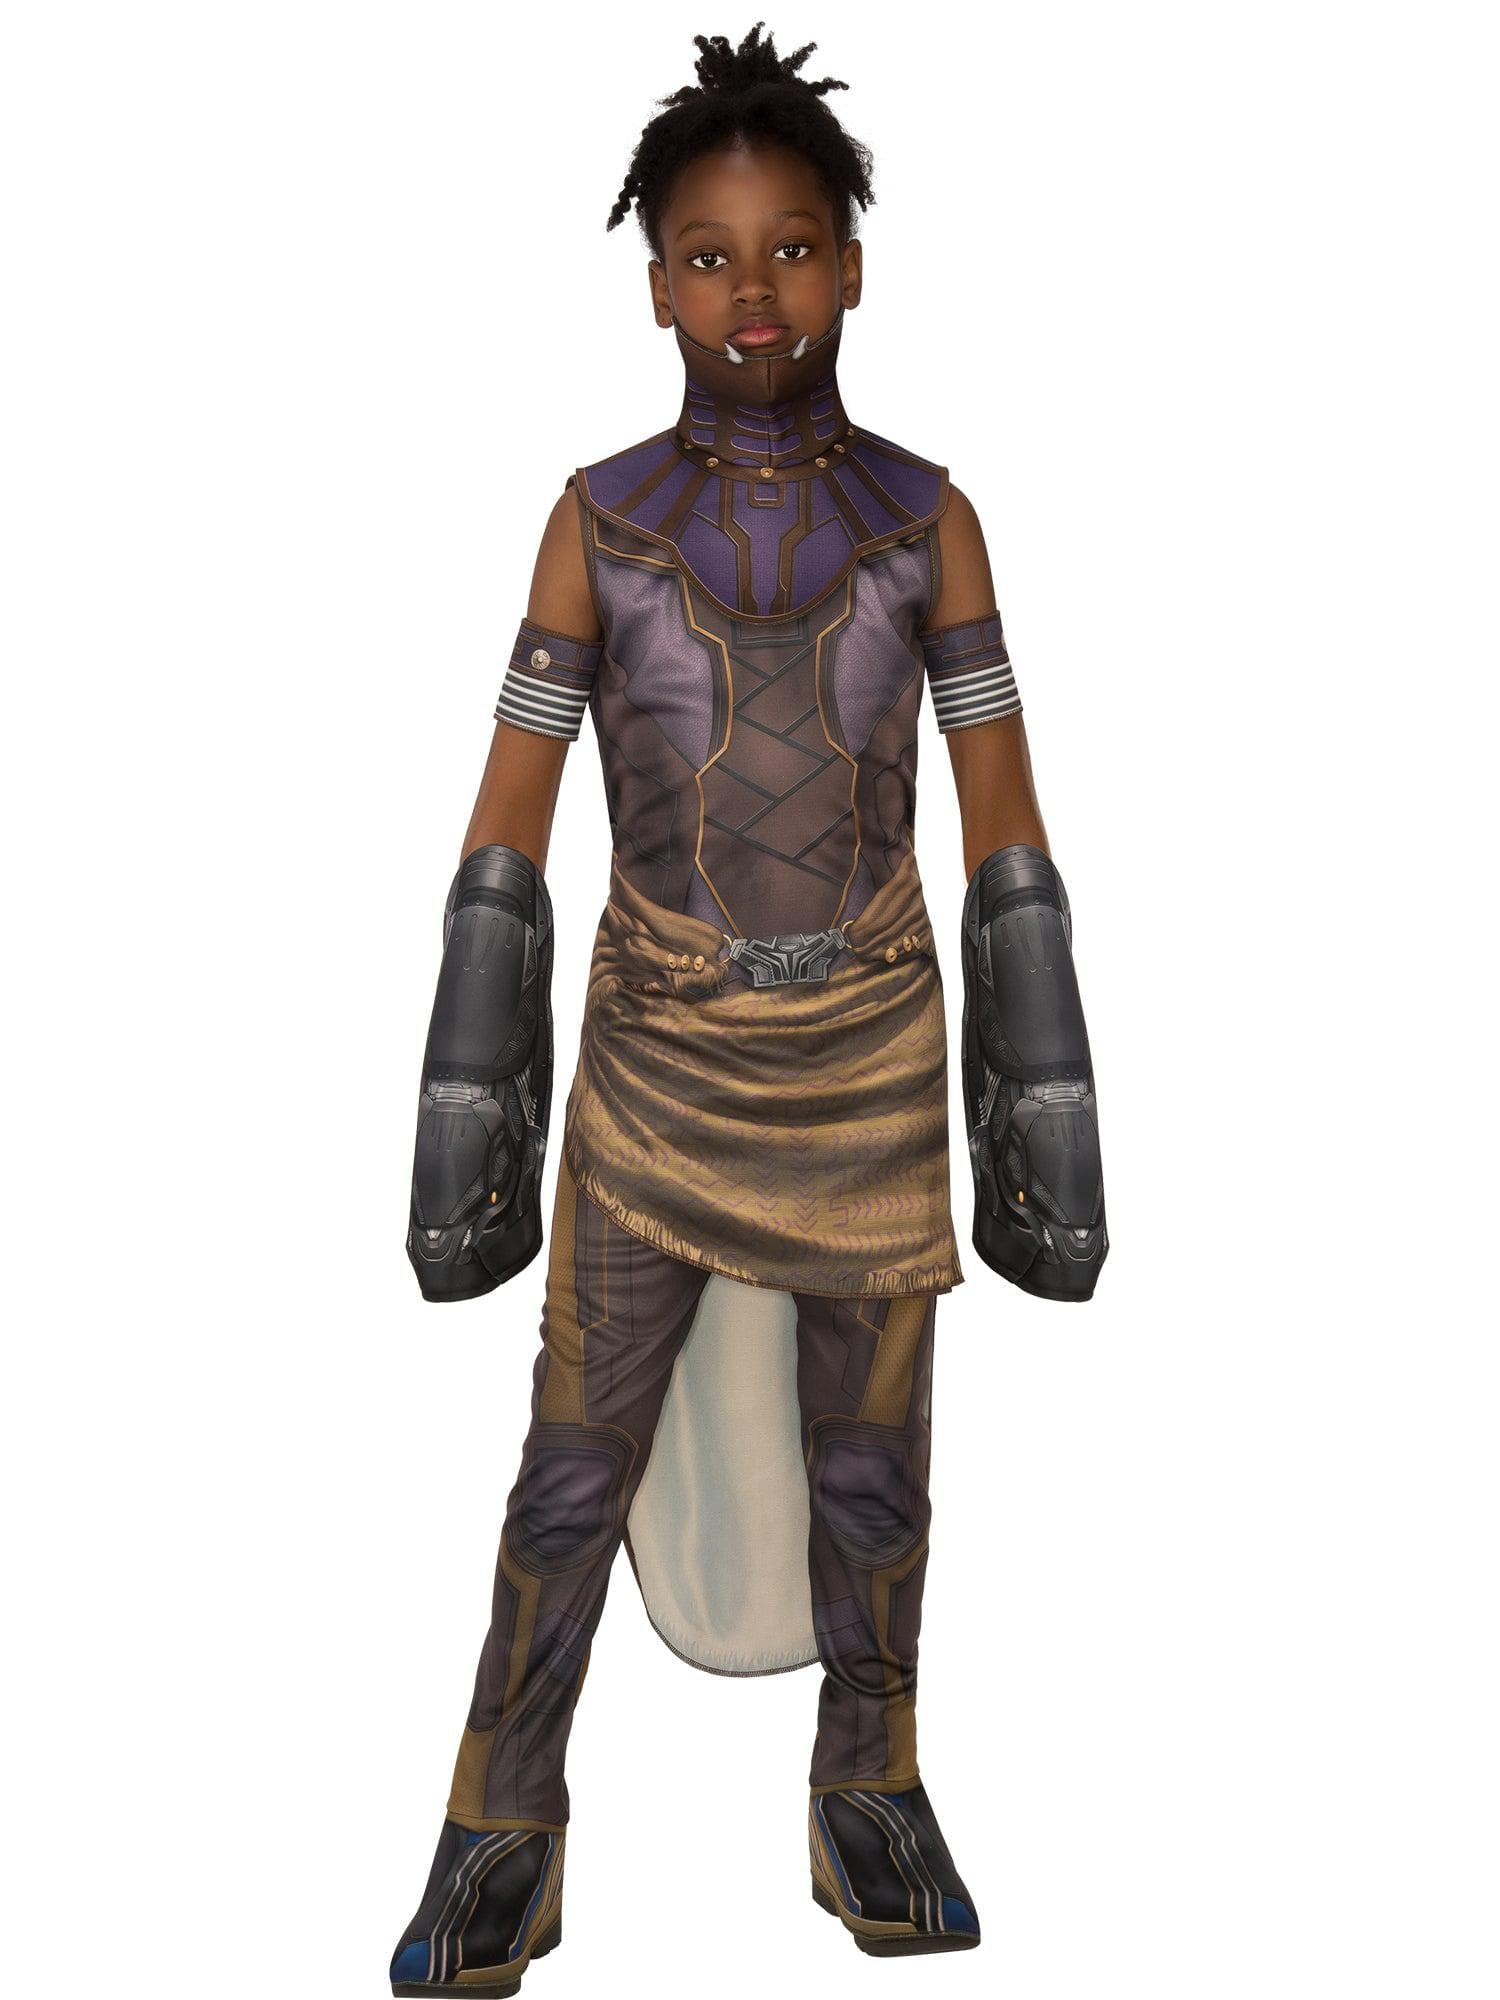 Kids Black Panther Shuri Deluxe Costume - costumes.com